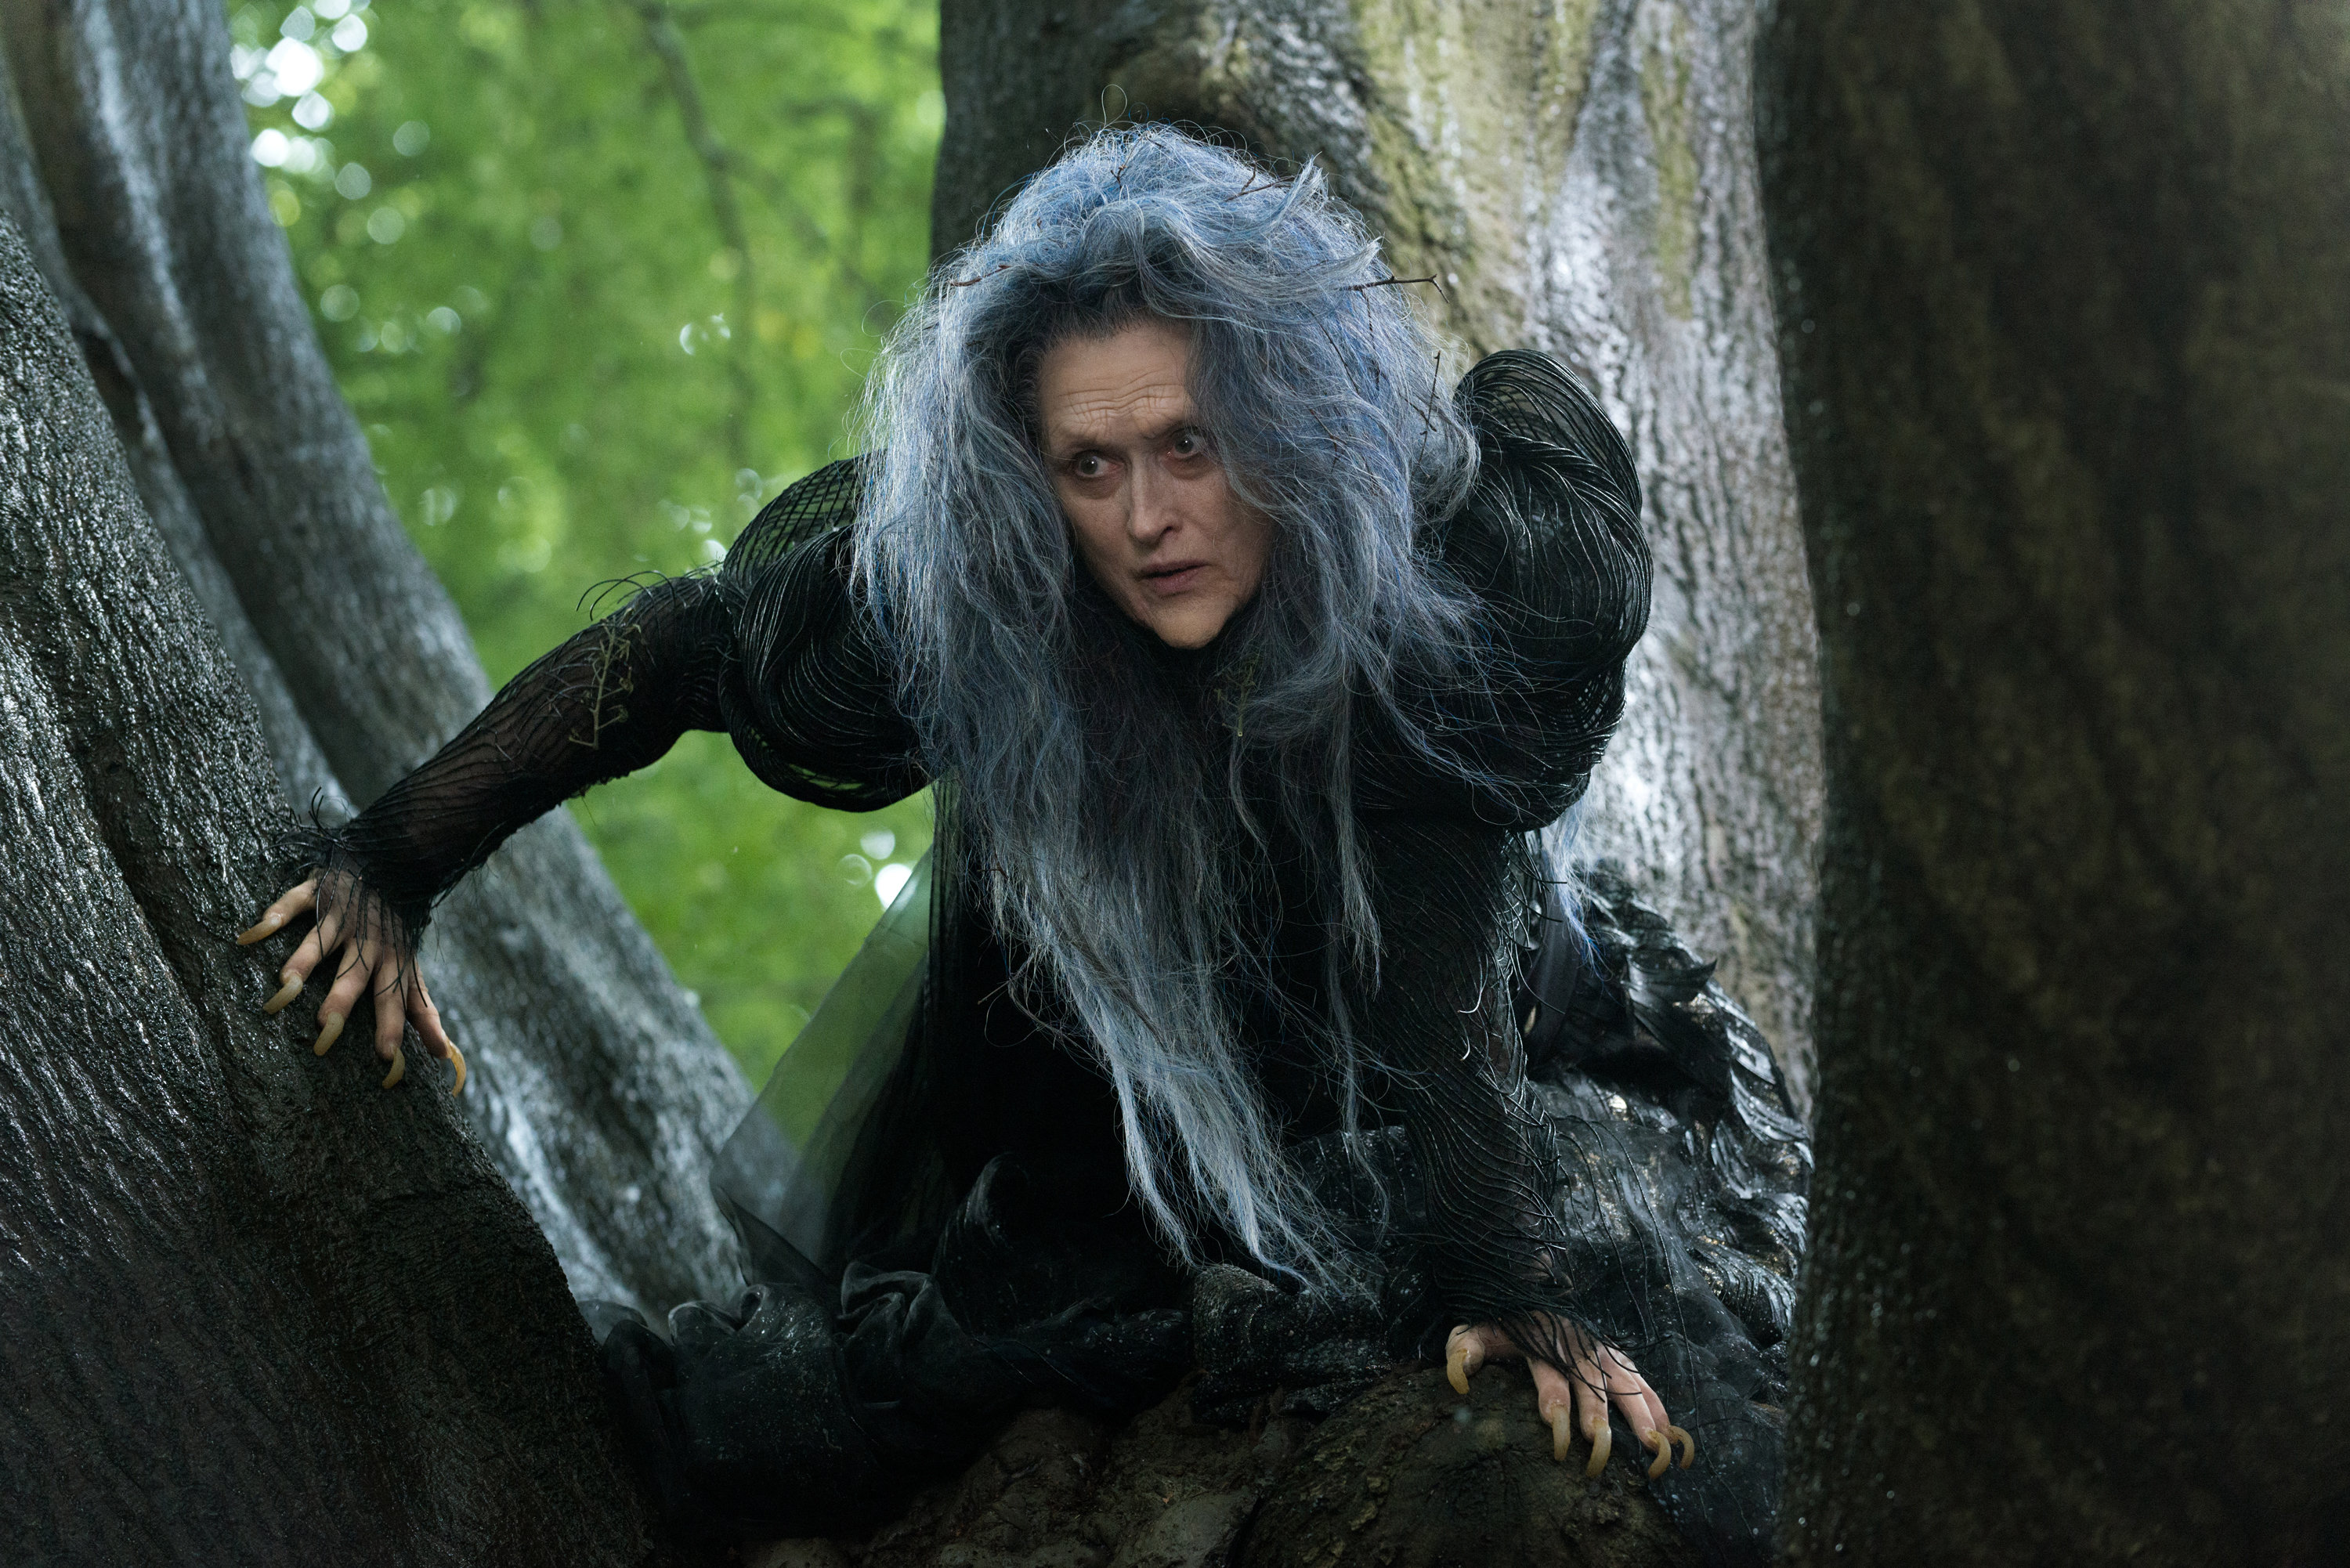 Into the Woods Gets 3 Oscar Nominations Including Costume Design ...